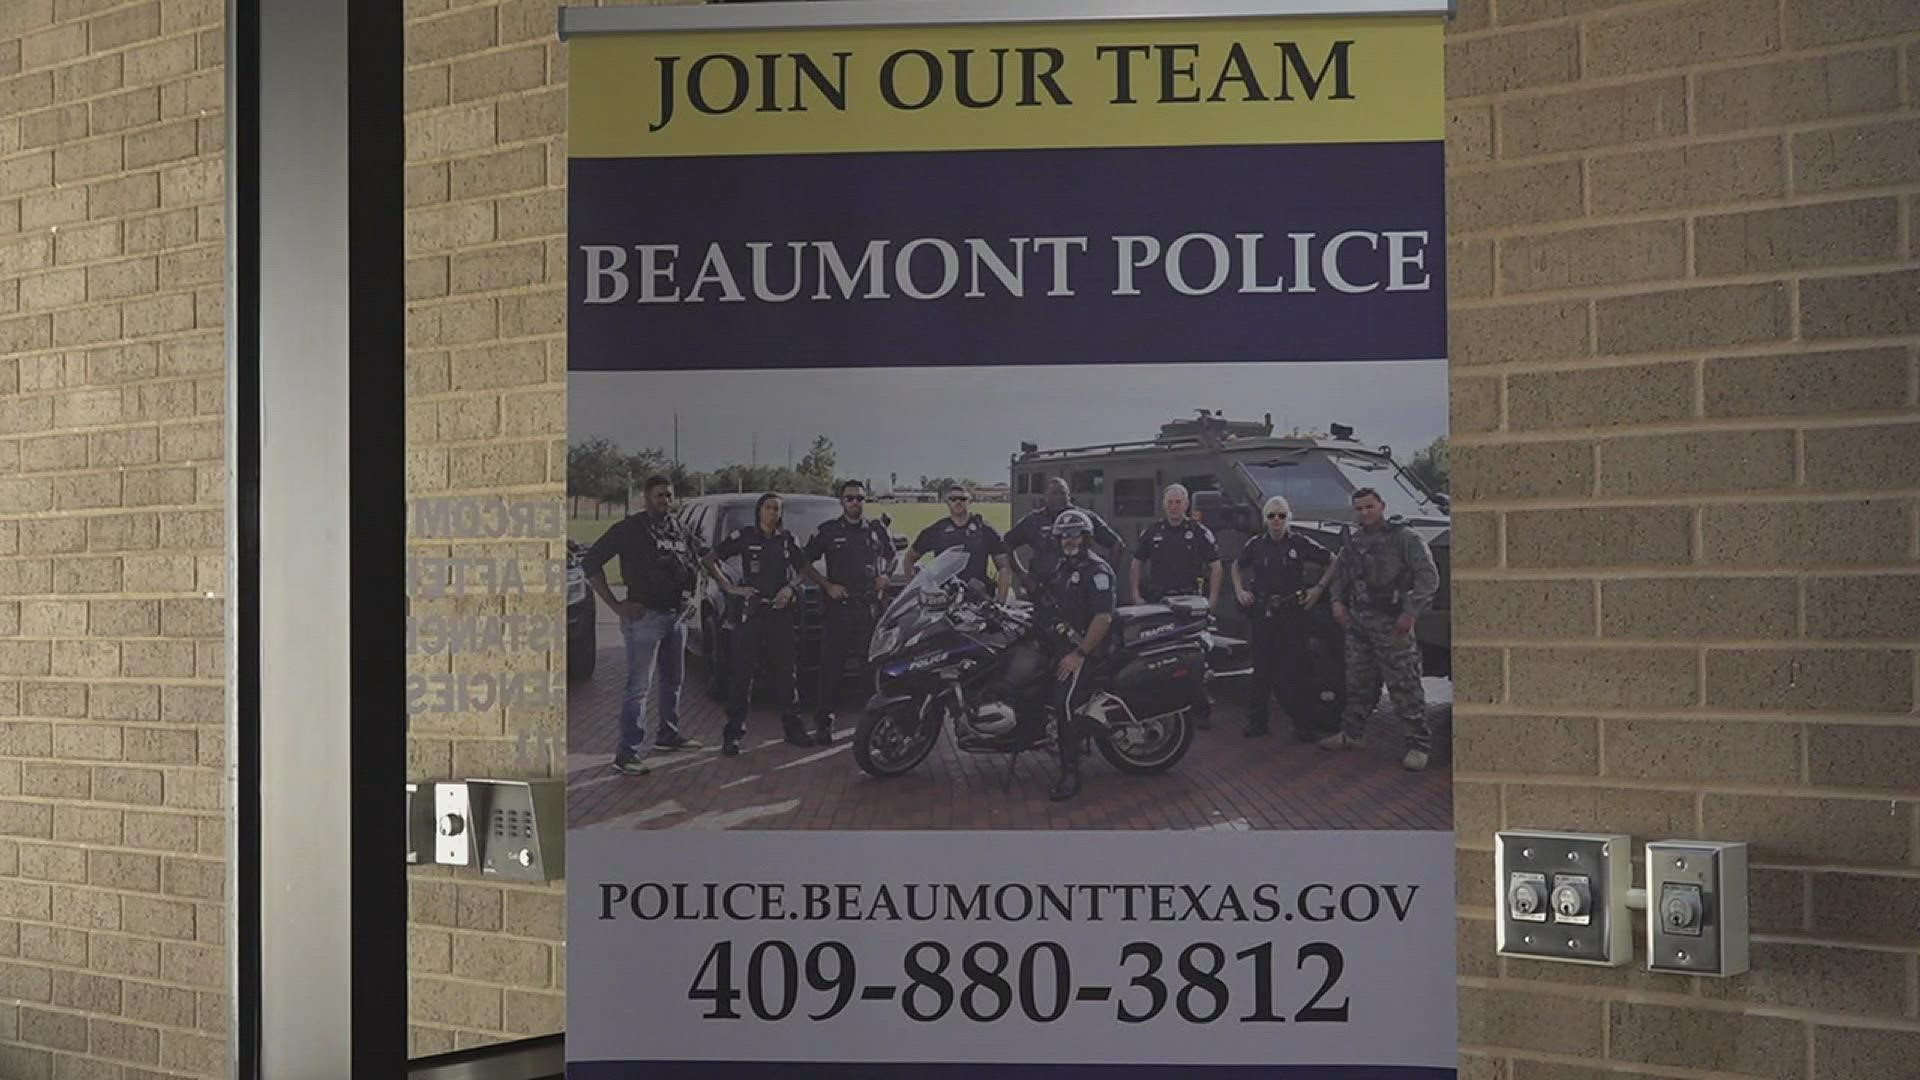 Beaumont Police chief Jimmy Singletary says that police departments across the country are struggling to recruit new officers.